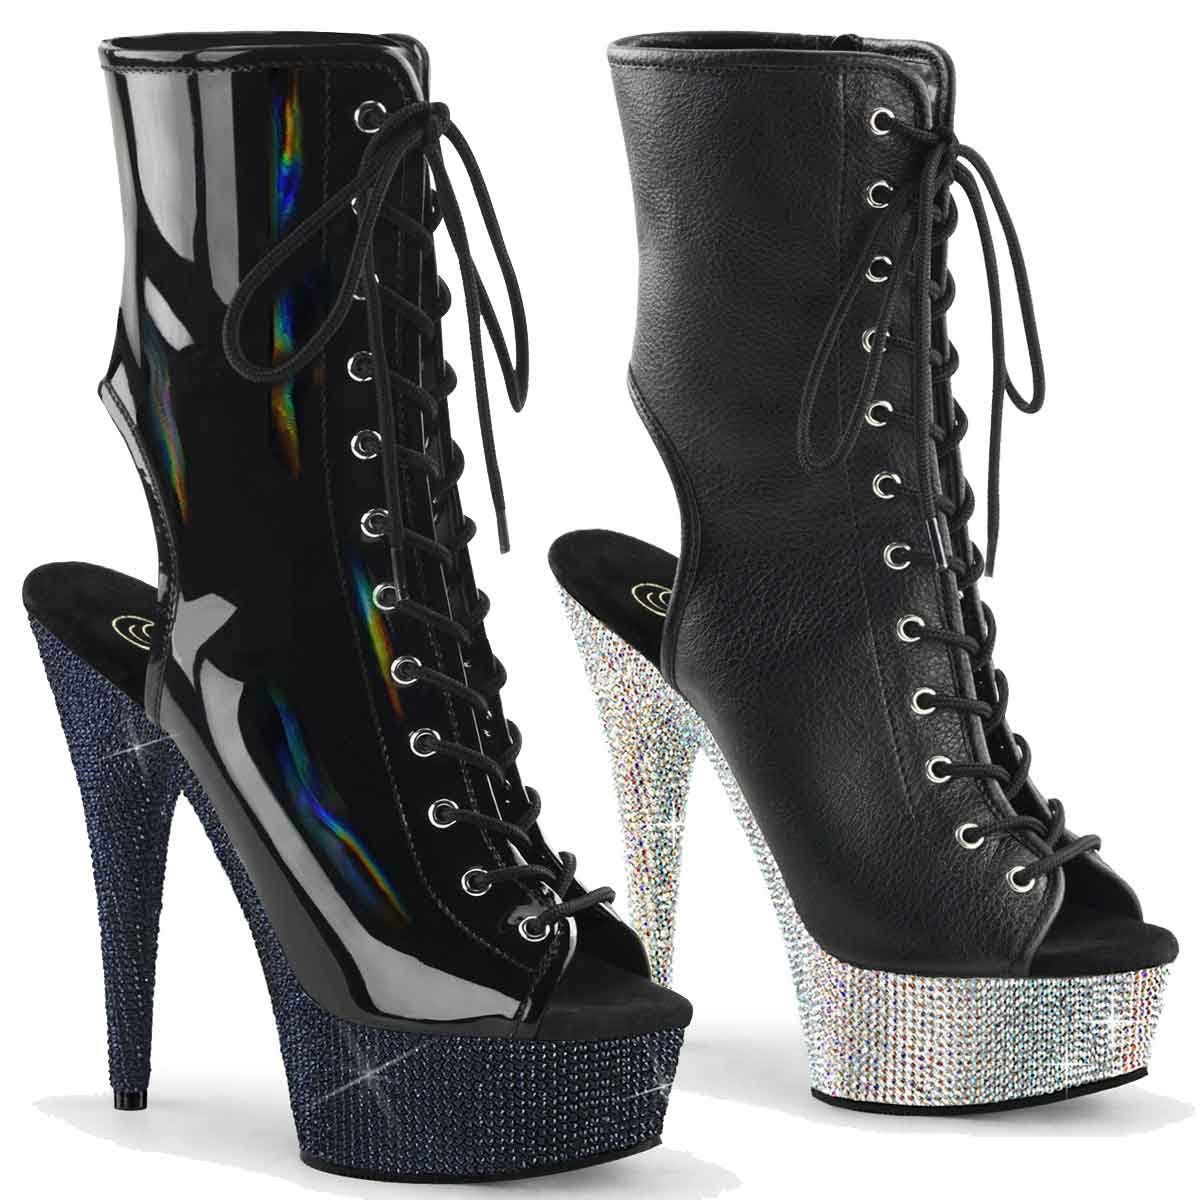 Blinged-Out Platform Open Toe Boots by Pleaser | Image